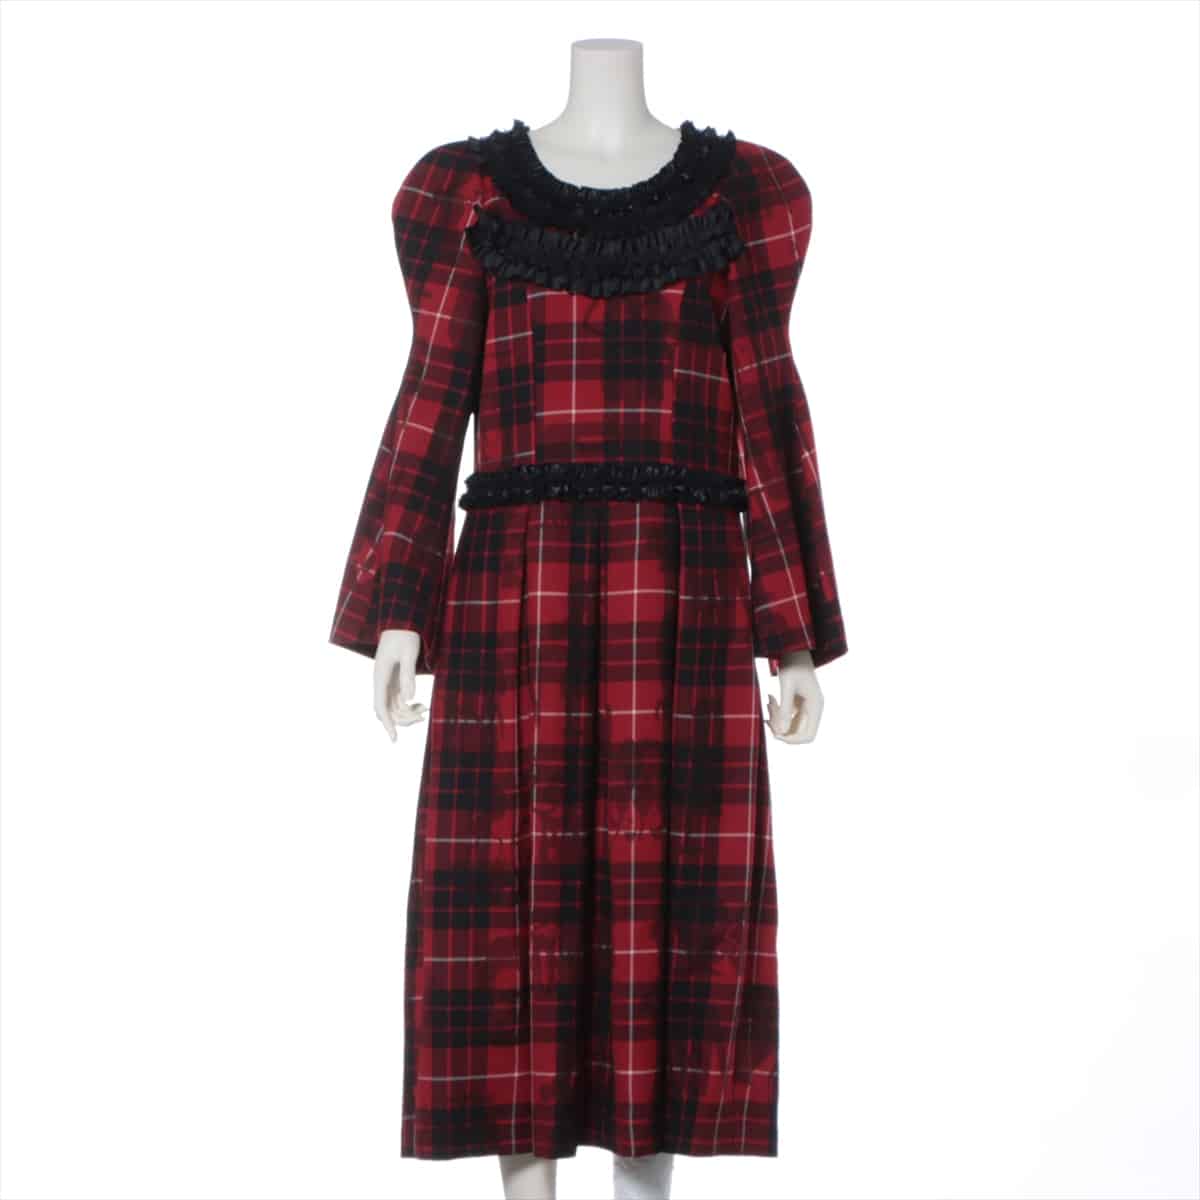 Comme des Garçons AD2019 Wool & polyester Dress S Ladies' Red  GD-O035